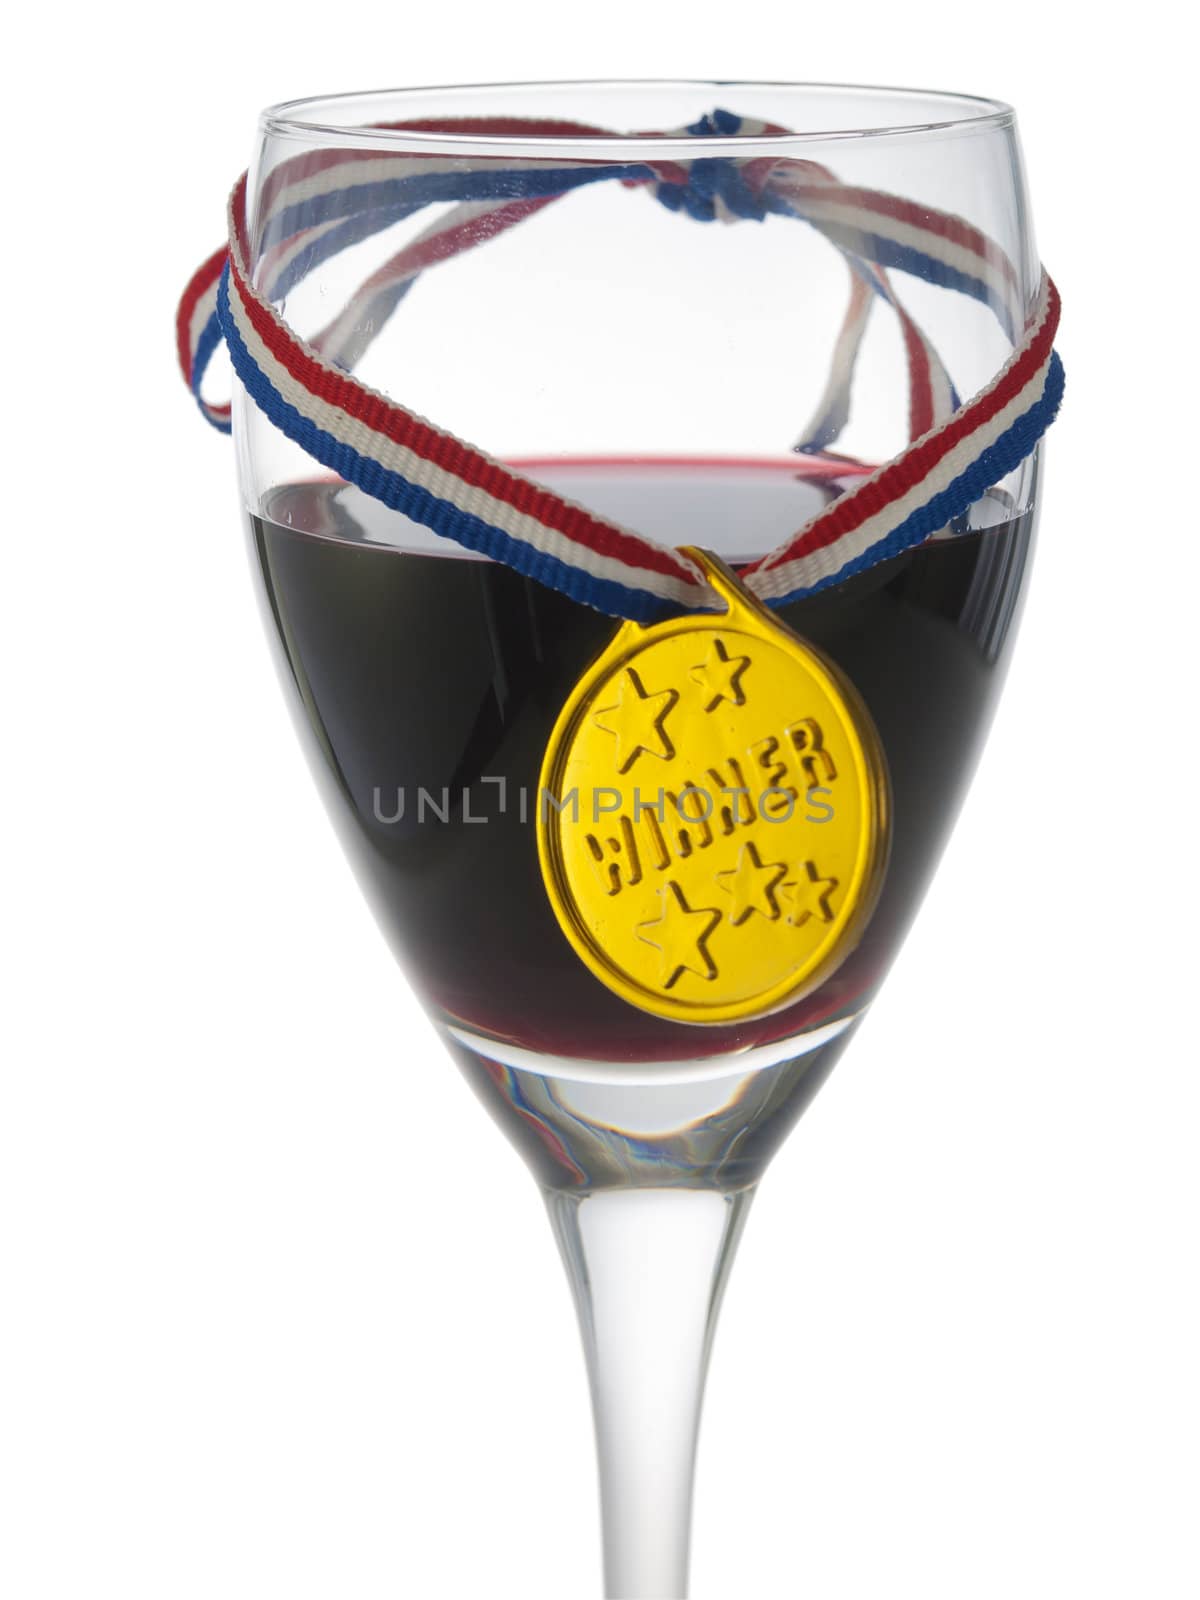 Glass with red wine with a medal winner